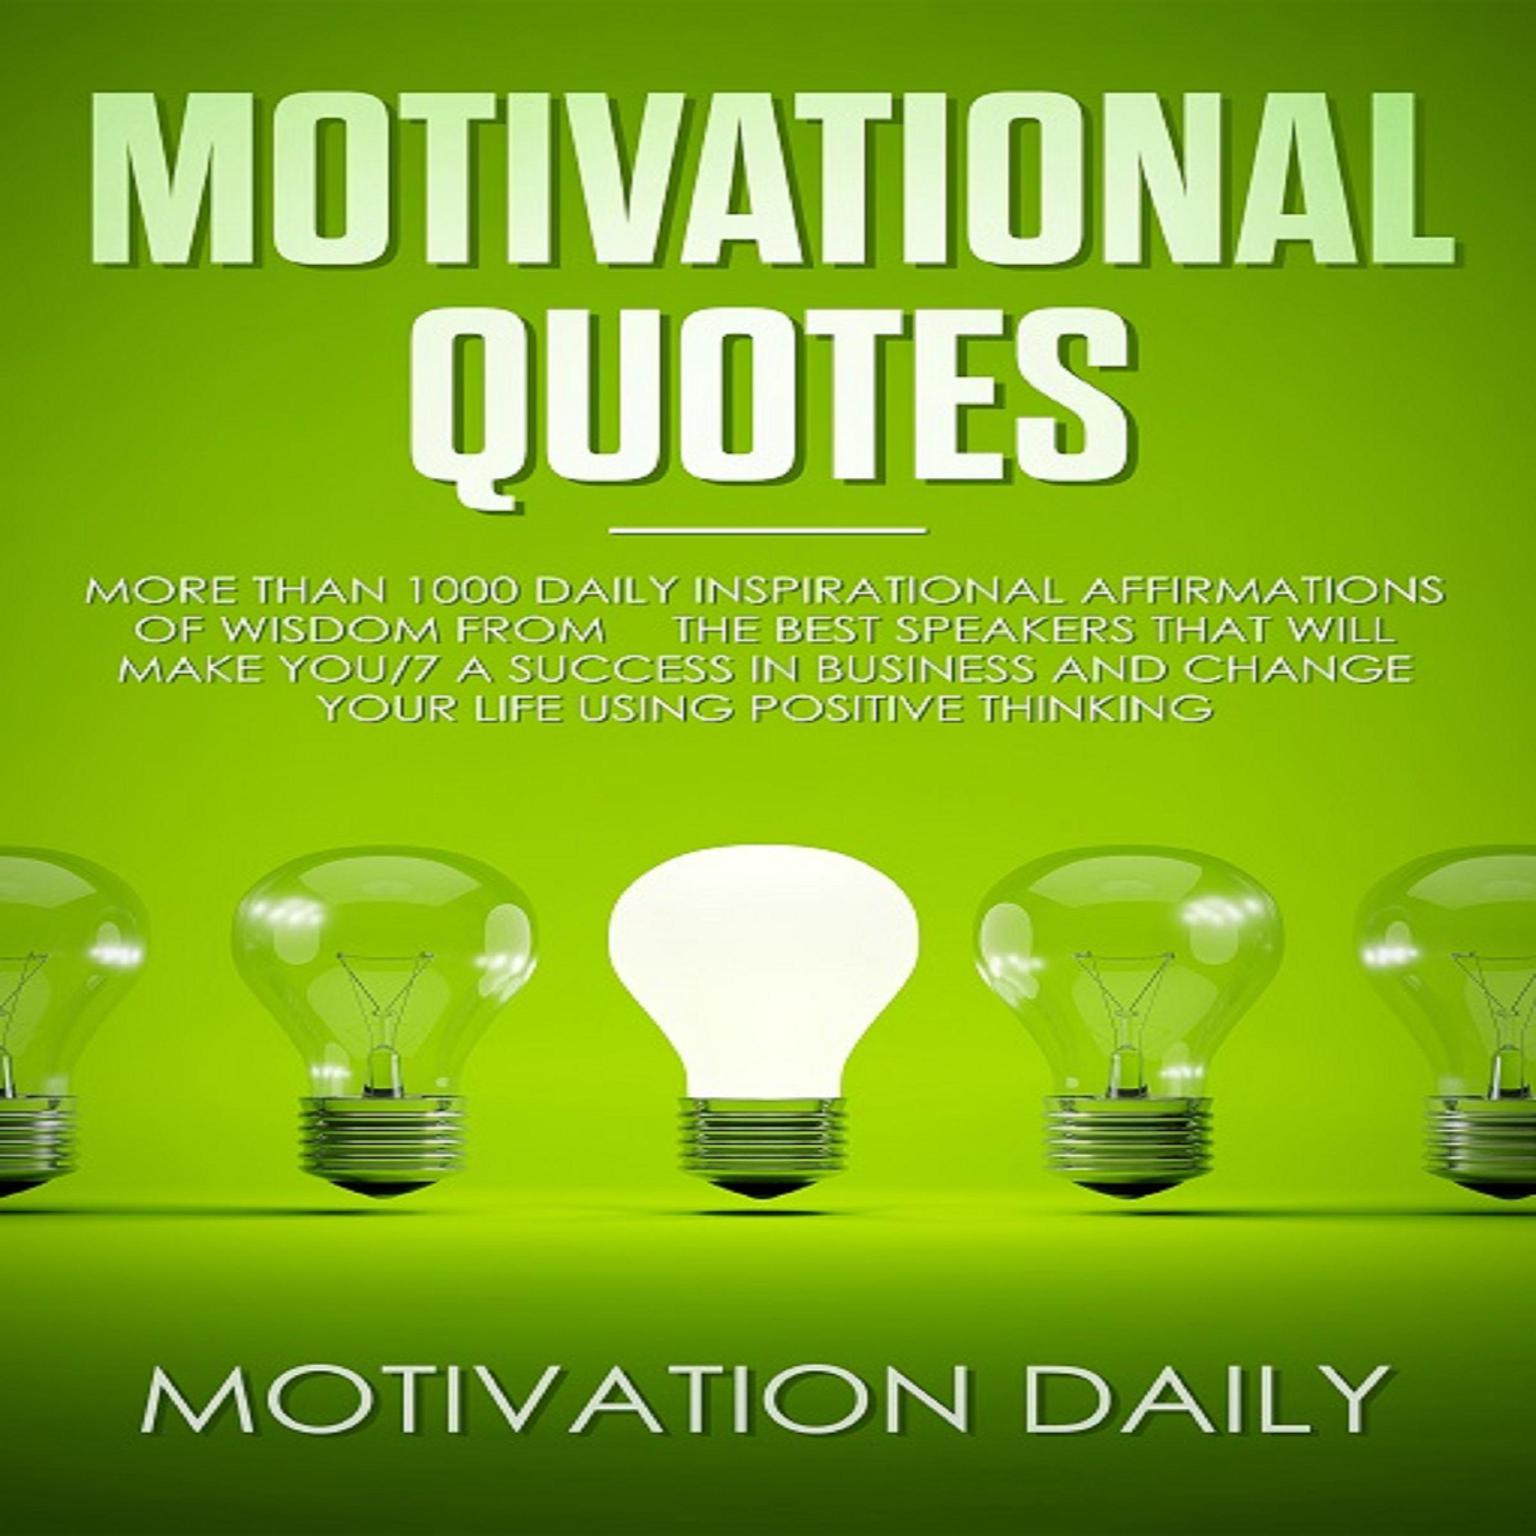 Motivational Quotes: More than 1000 Daily Inspirational Affirmations of Wisdom from the Best Speakers that will make you a Success in Business and change your Life using Positive Thinking Audiobook, by Motivation Daily